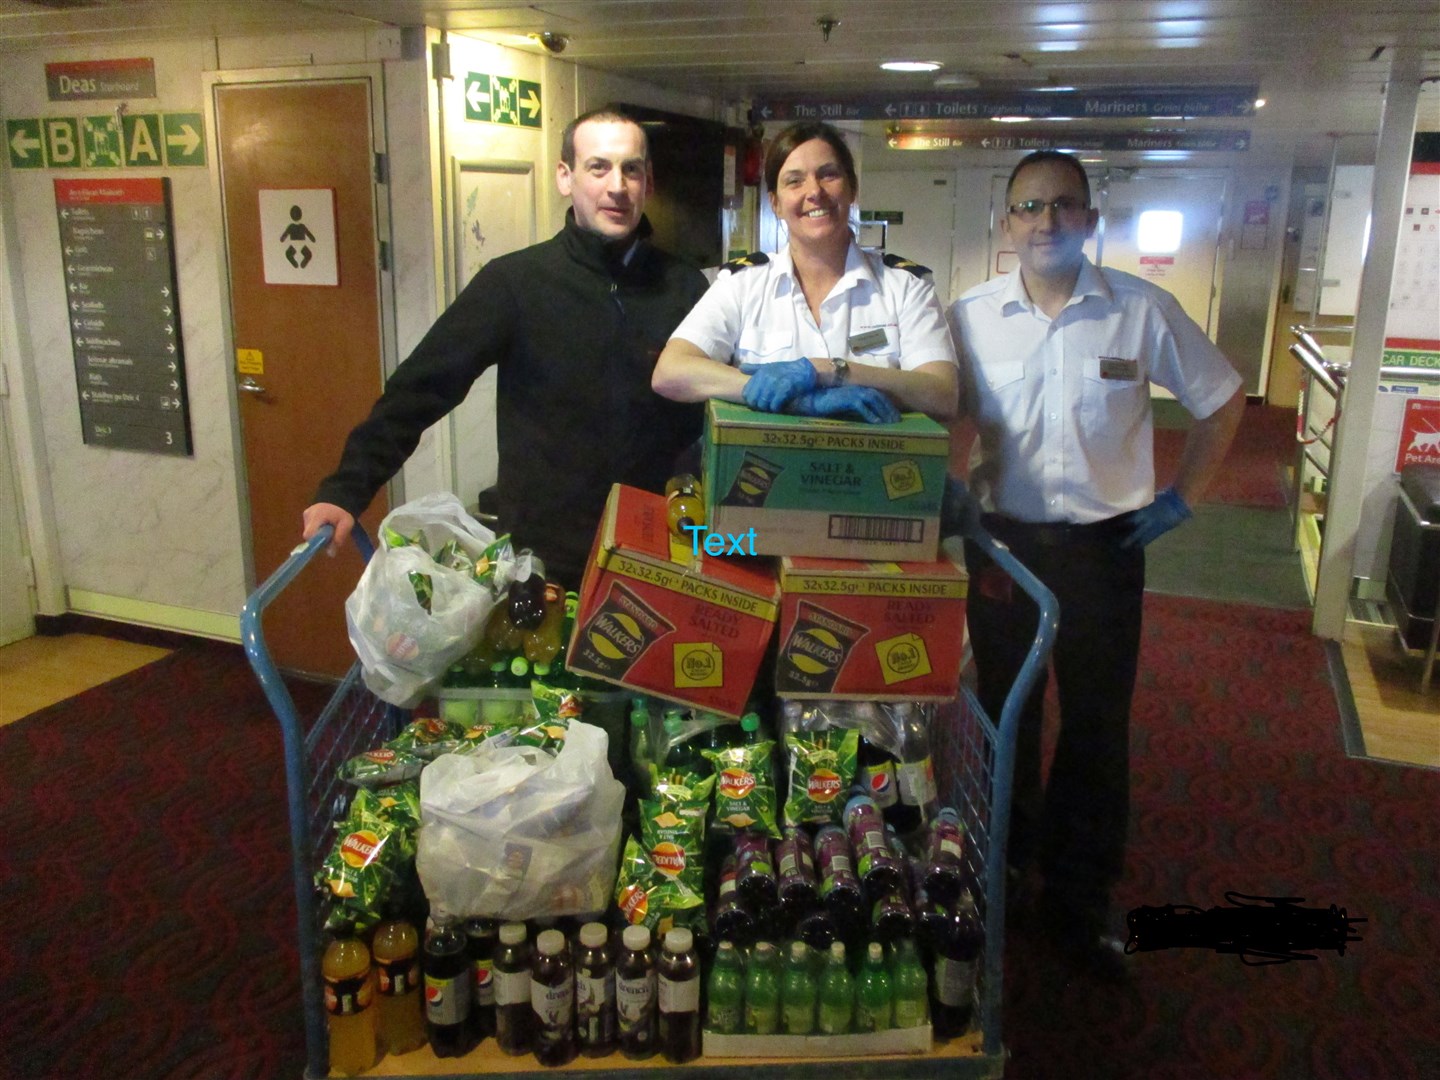 CalMac crew members (left to right) Ian MacLennan, Donna Maxwell and Keith MacMillan from the MV Isle of Mull prepare a fiid shipment for distribution.